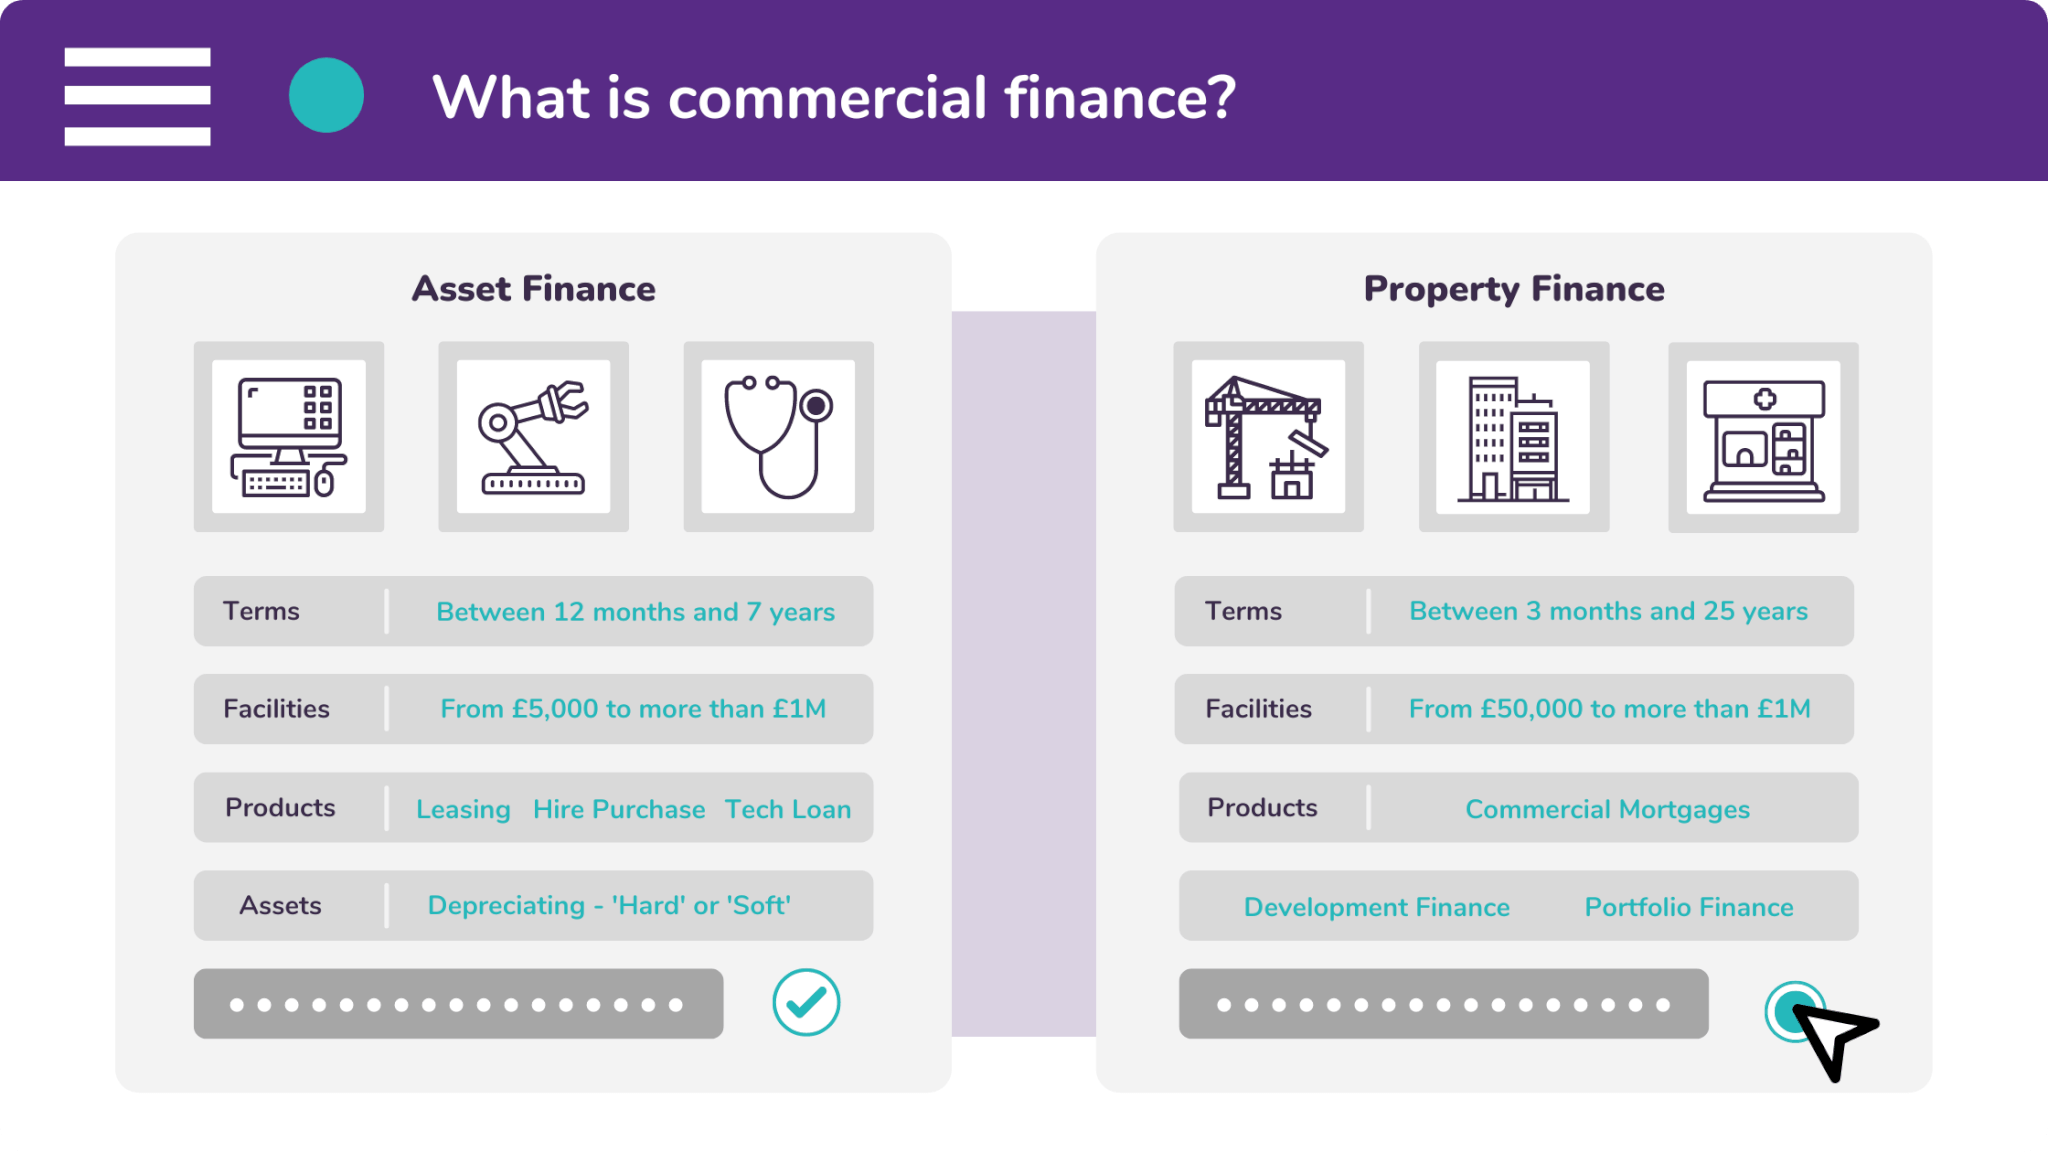 Commercial finance allows a business to invest in itself. It includes asset finance and property finance.